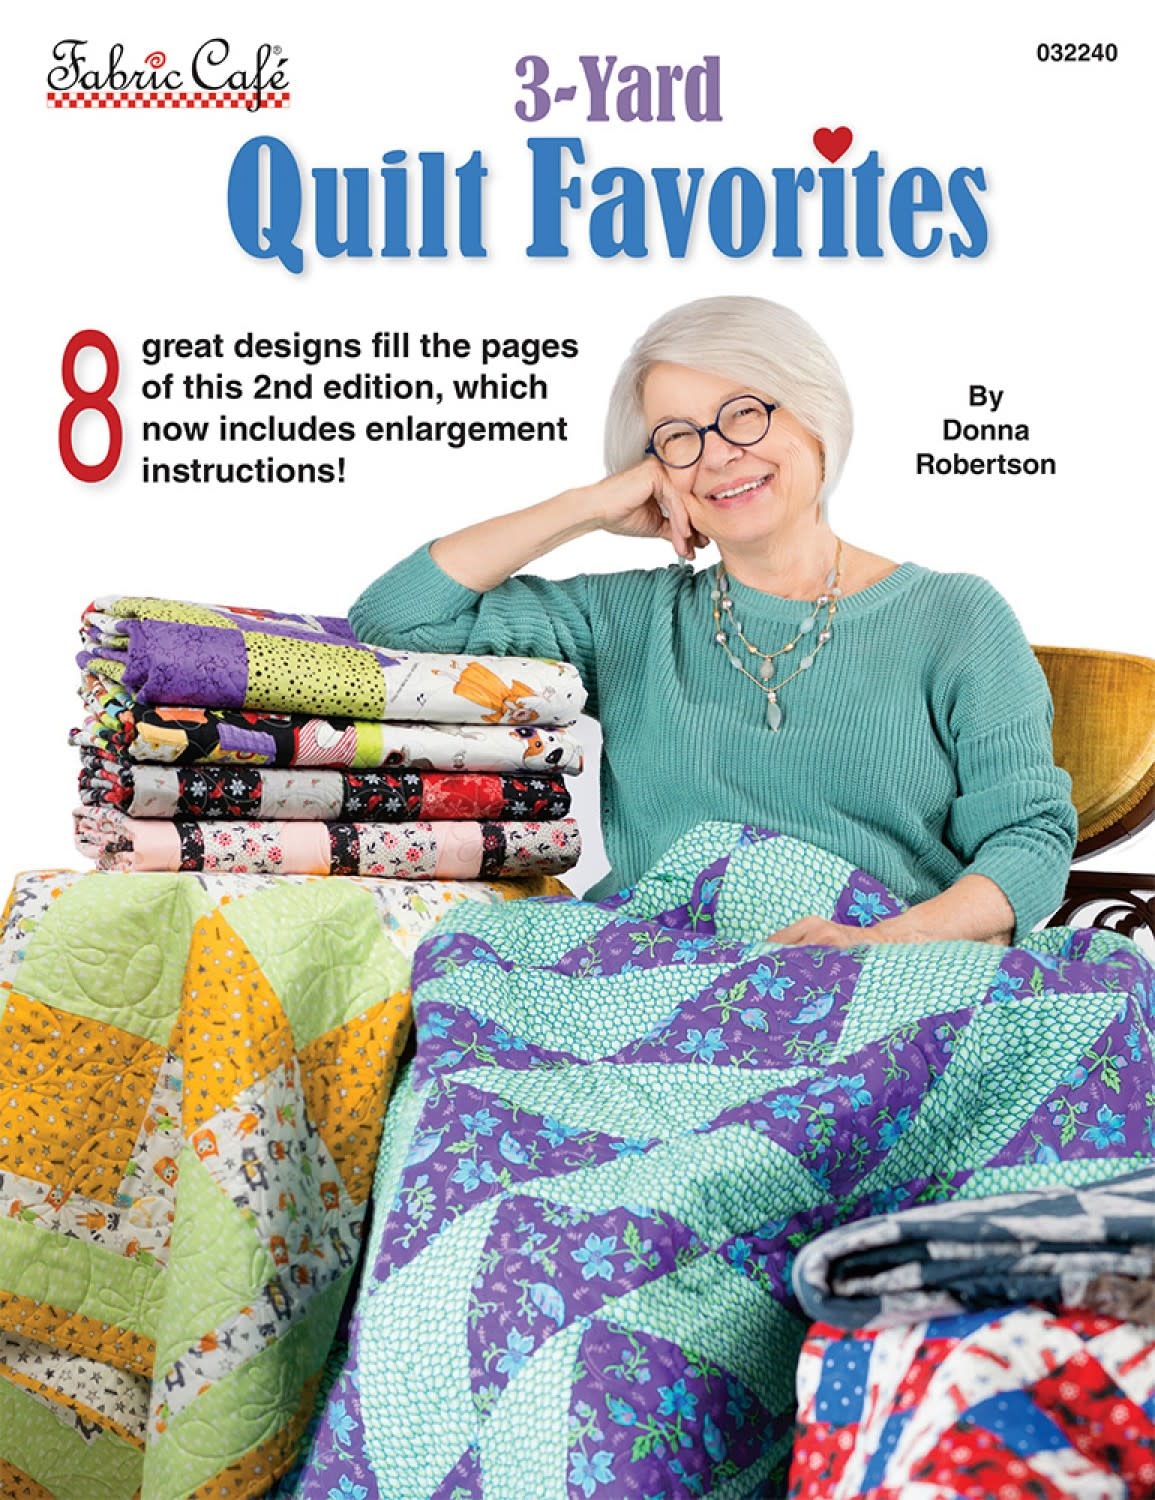 Fabric Cafe 3-Yard Quilt Favorites